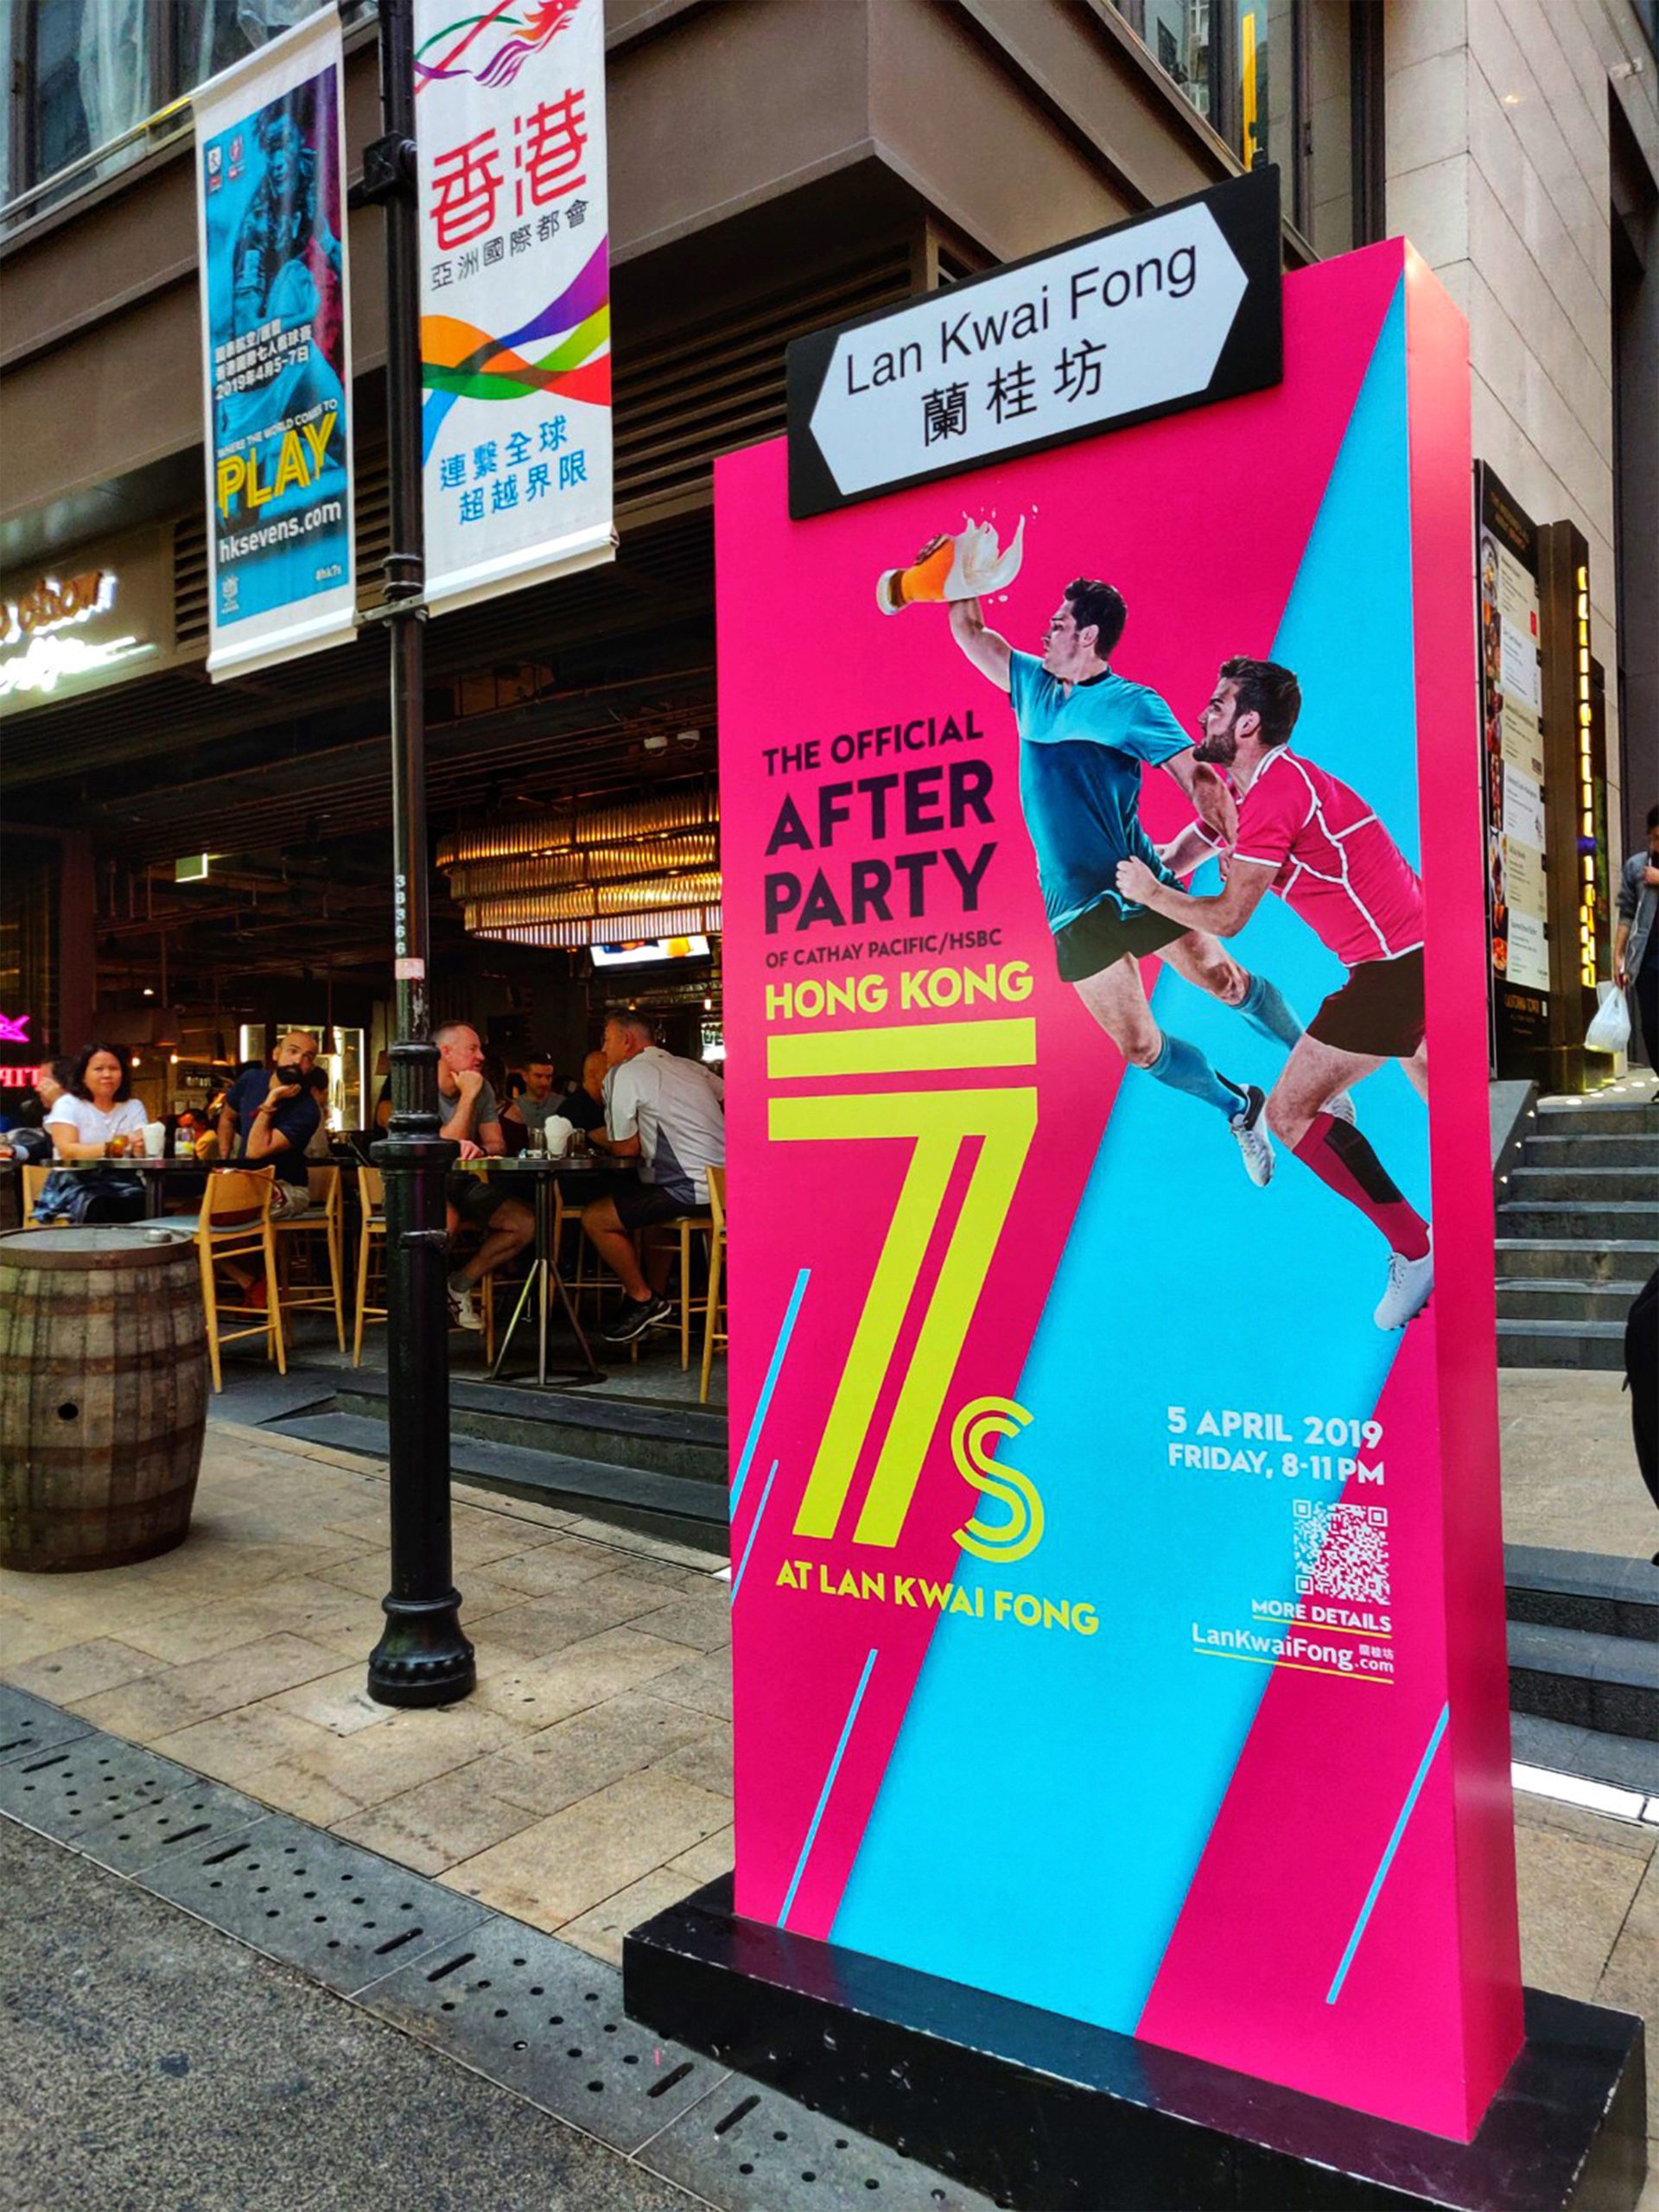 Hong Kong Seven advertisement placed under road sign designed by ipulse creative agency in Hong Kong